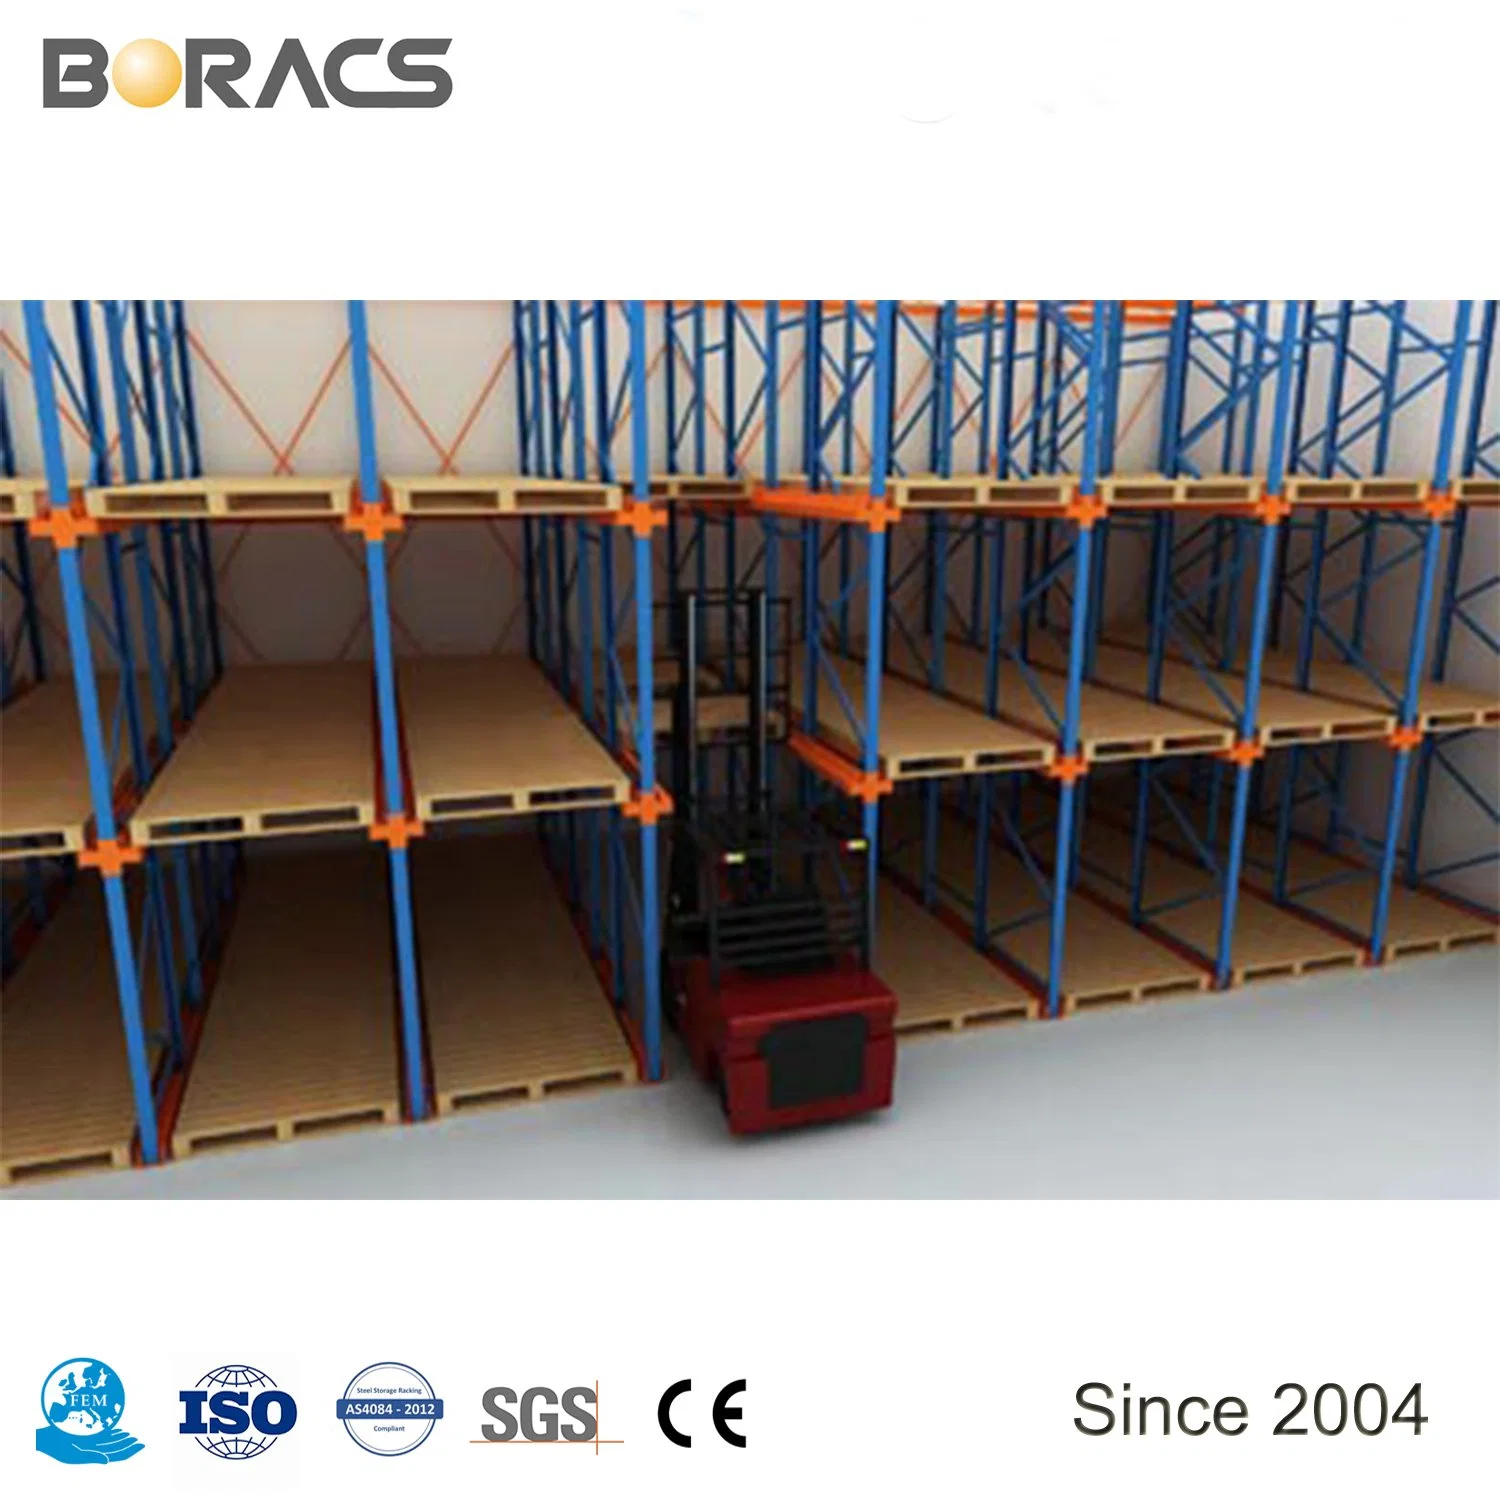 Industrial Racking Used Hot Sell Cold Warehouse Drive-in Rack Pallet Storage Racking System